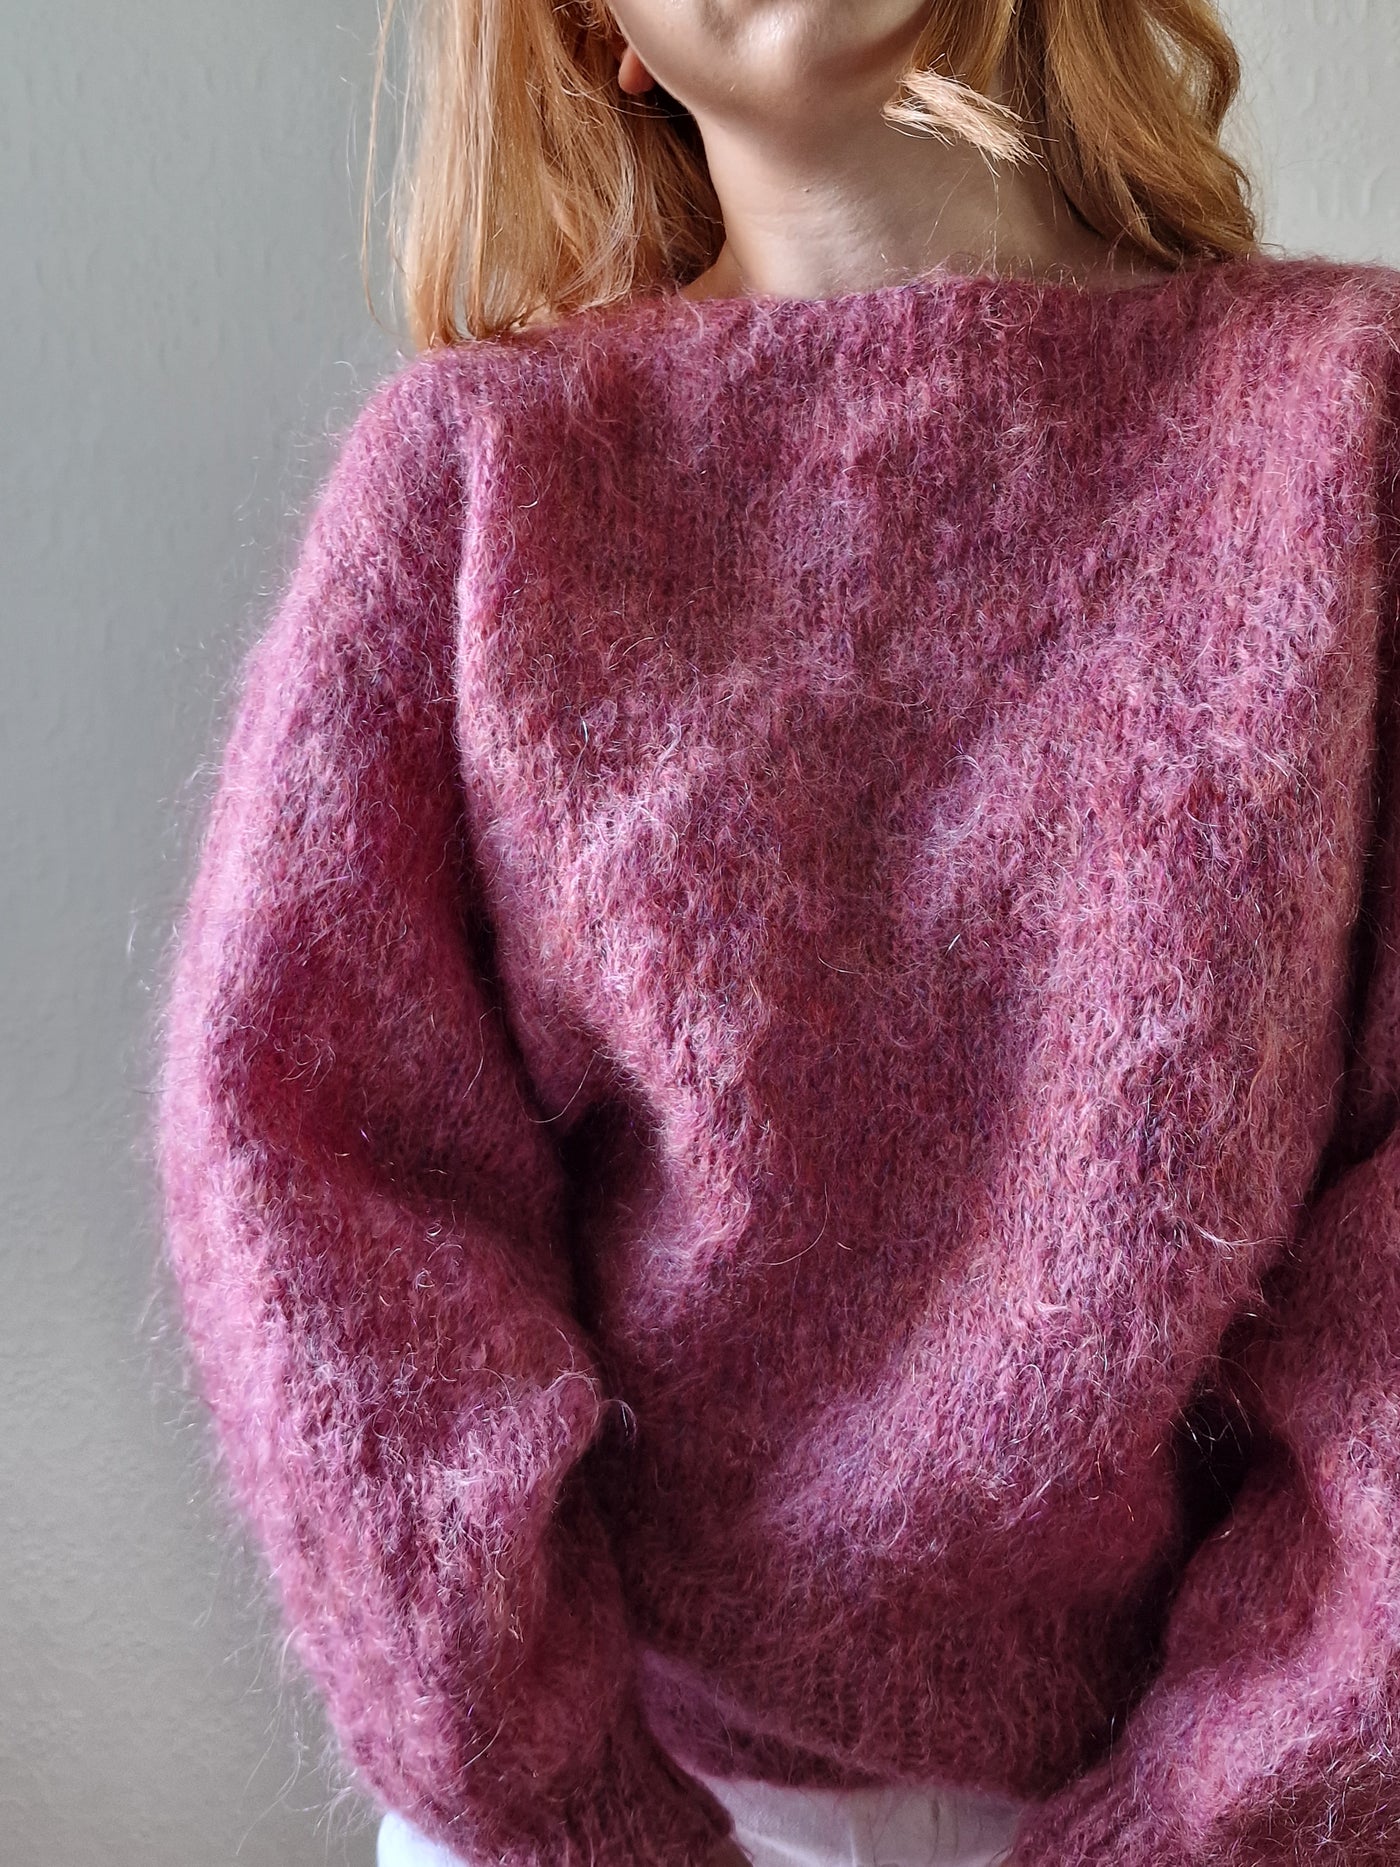 Vintage 80s Handknitted Dark Pink Mohair Jumper with Batwing Sleeves - M/L